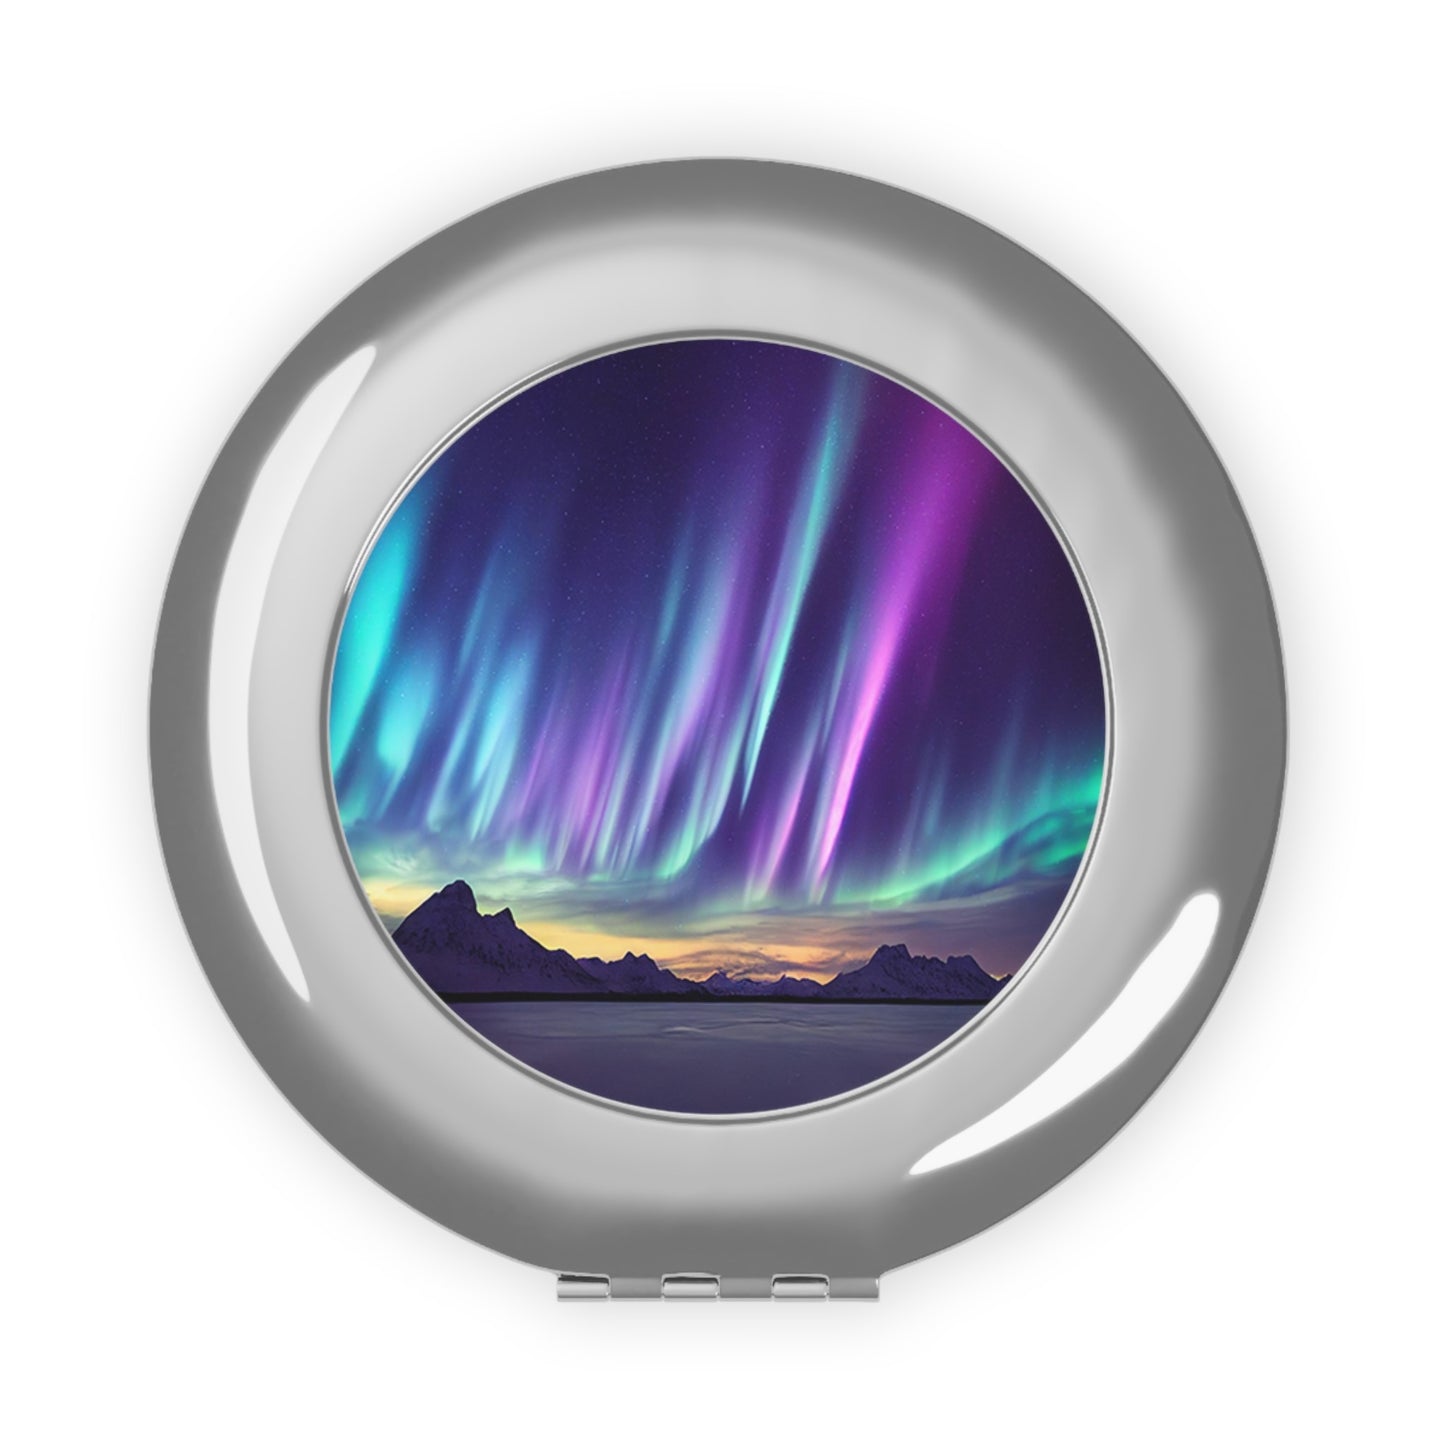 Unique Aurora Borealis Compact Travel Mirror - Northern Light Travel Accessories - Glossy Makeup Gadget - Perfect Aurora Lovers Gift 4